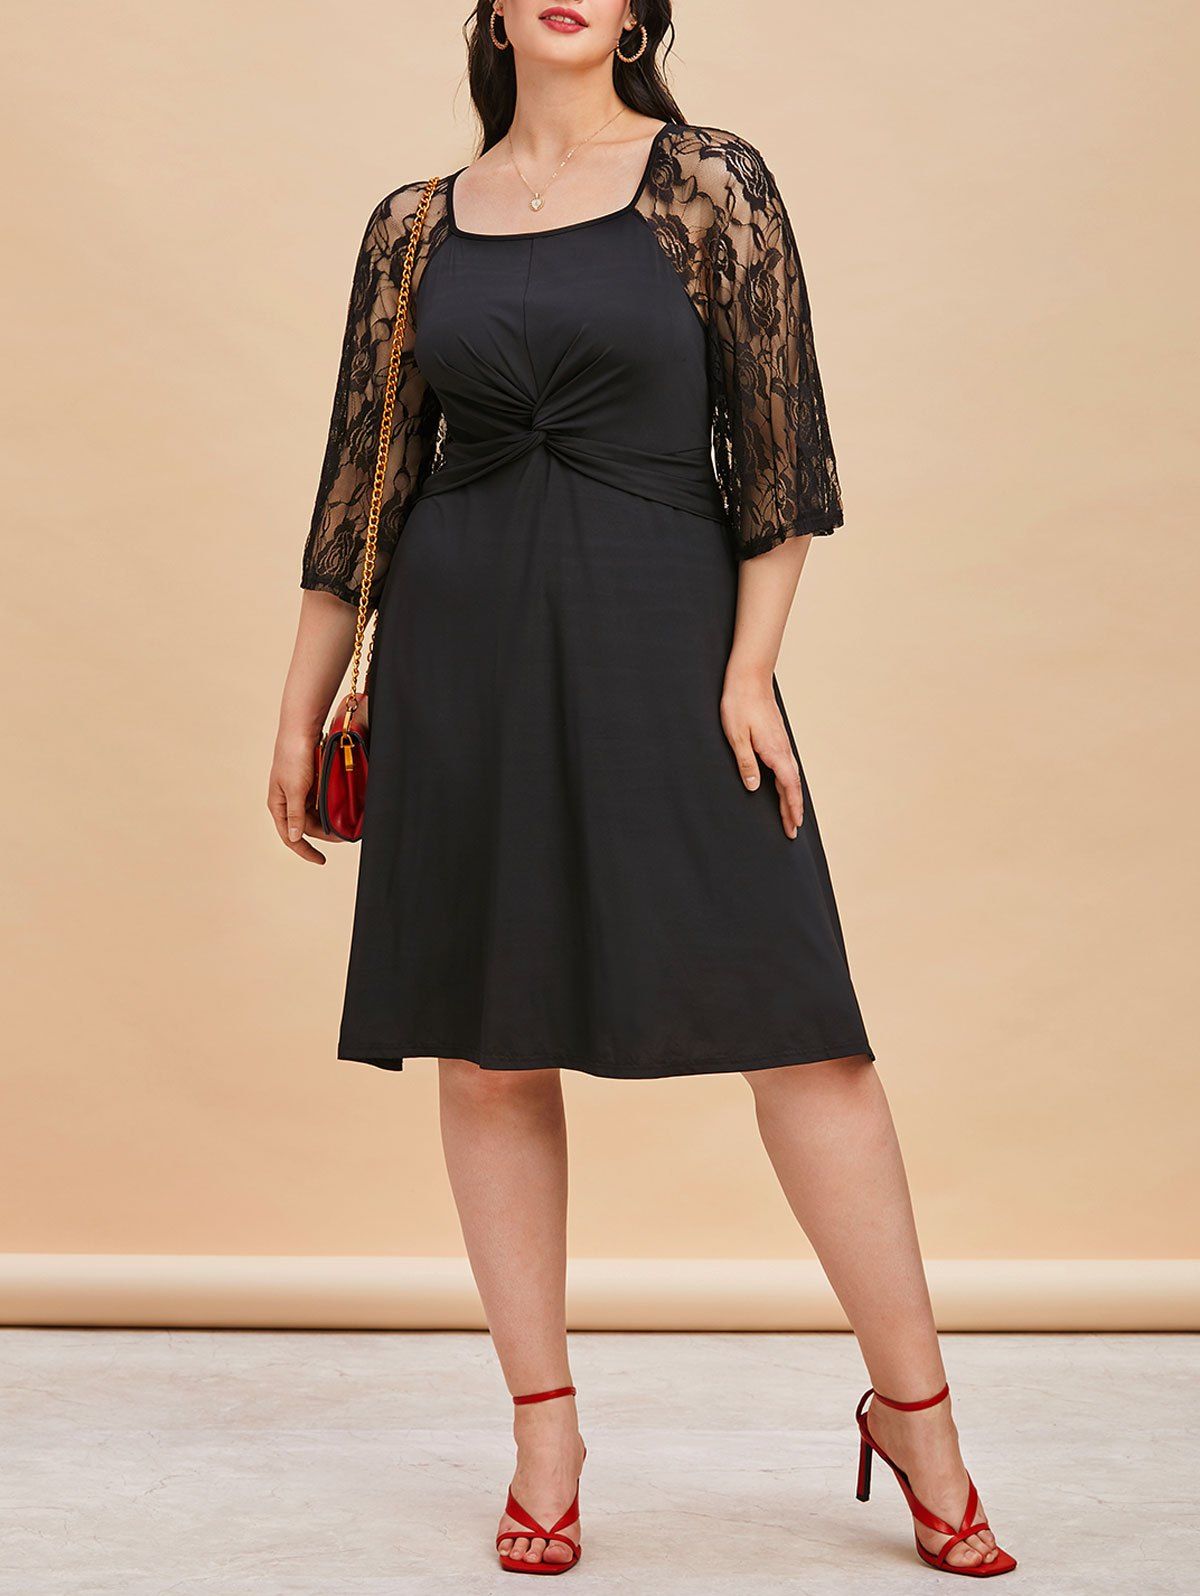 Plus Size Lace Insert Sheer Twisted Dress - BLACK 5X